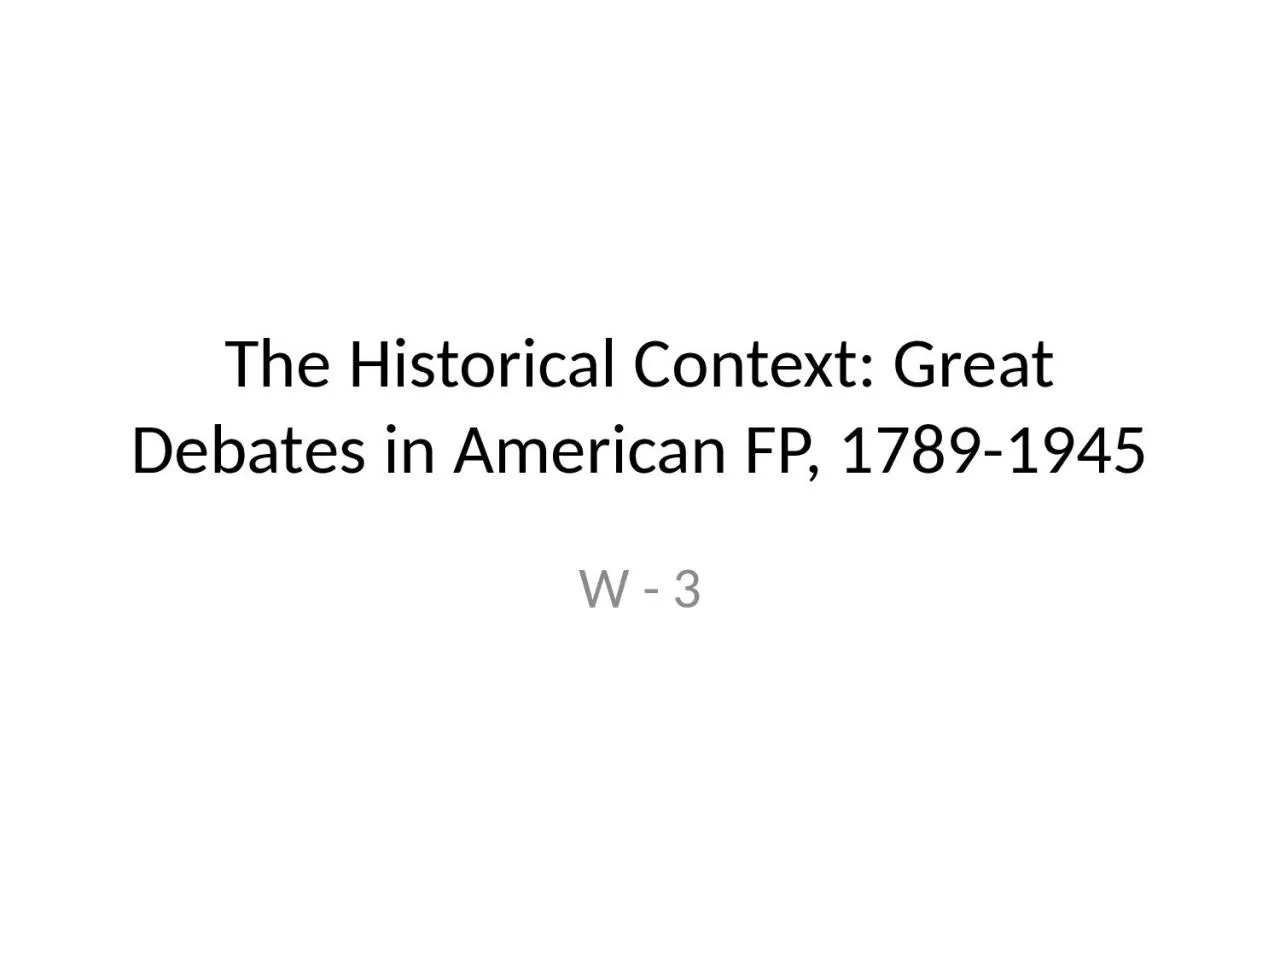 The Historical Context: Great Debates in American FP, 1789-1945